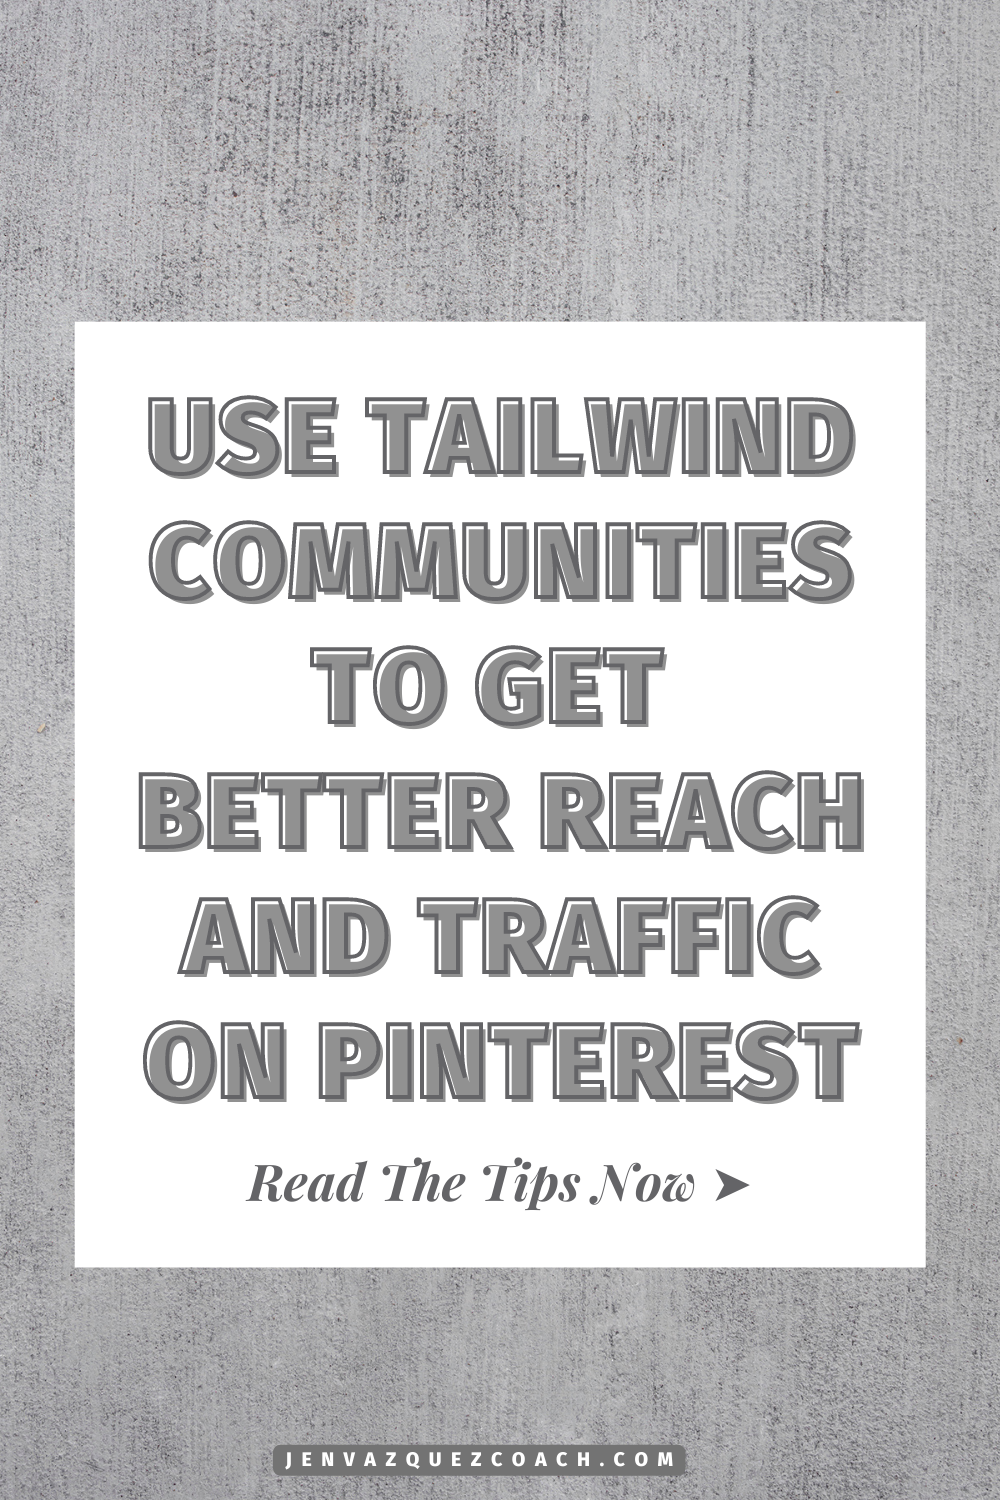 Maximizing Traffic with Tailwind Communities a guide for Pinterest users by Jen Vazquez Media 